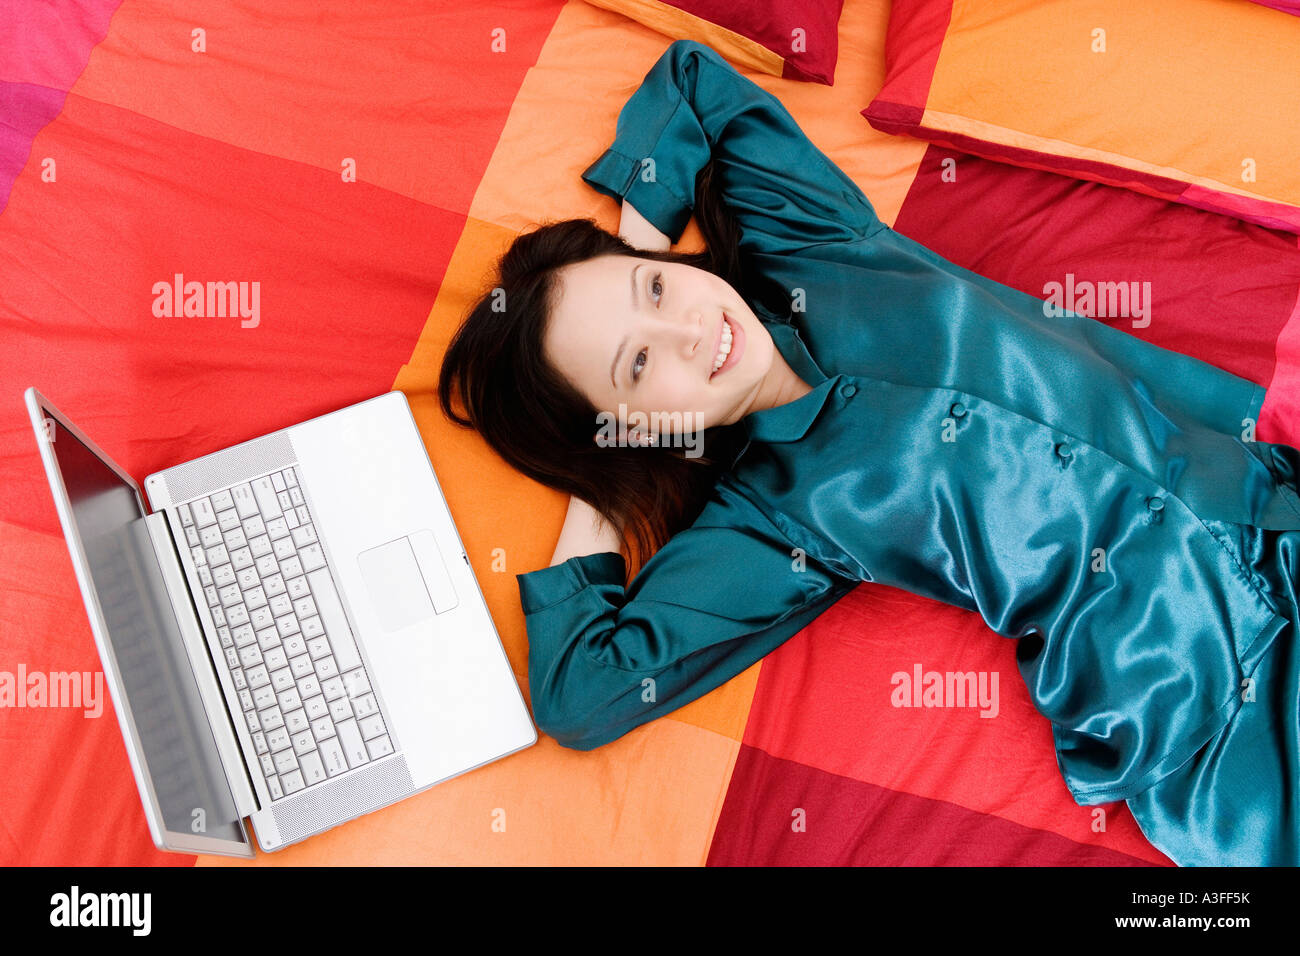 High angle view of a young woman lying on the bed Banque D'Images